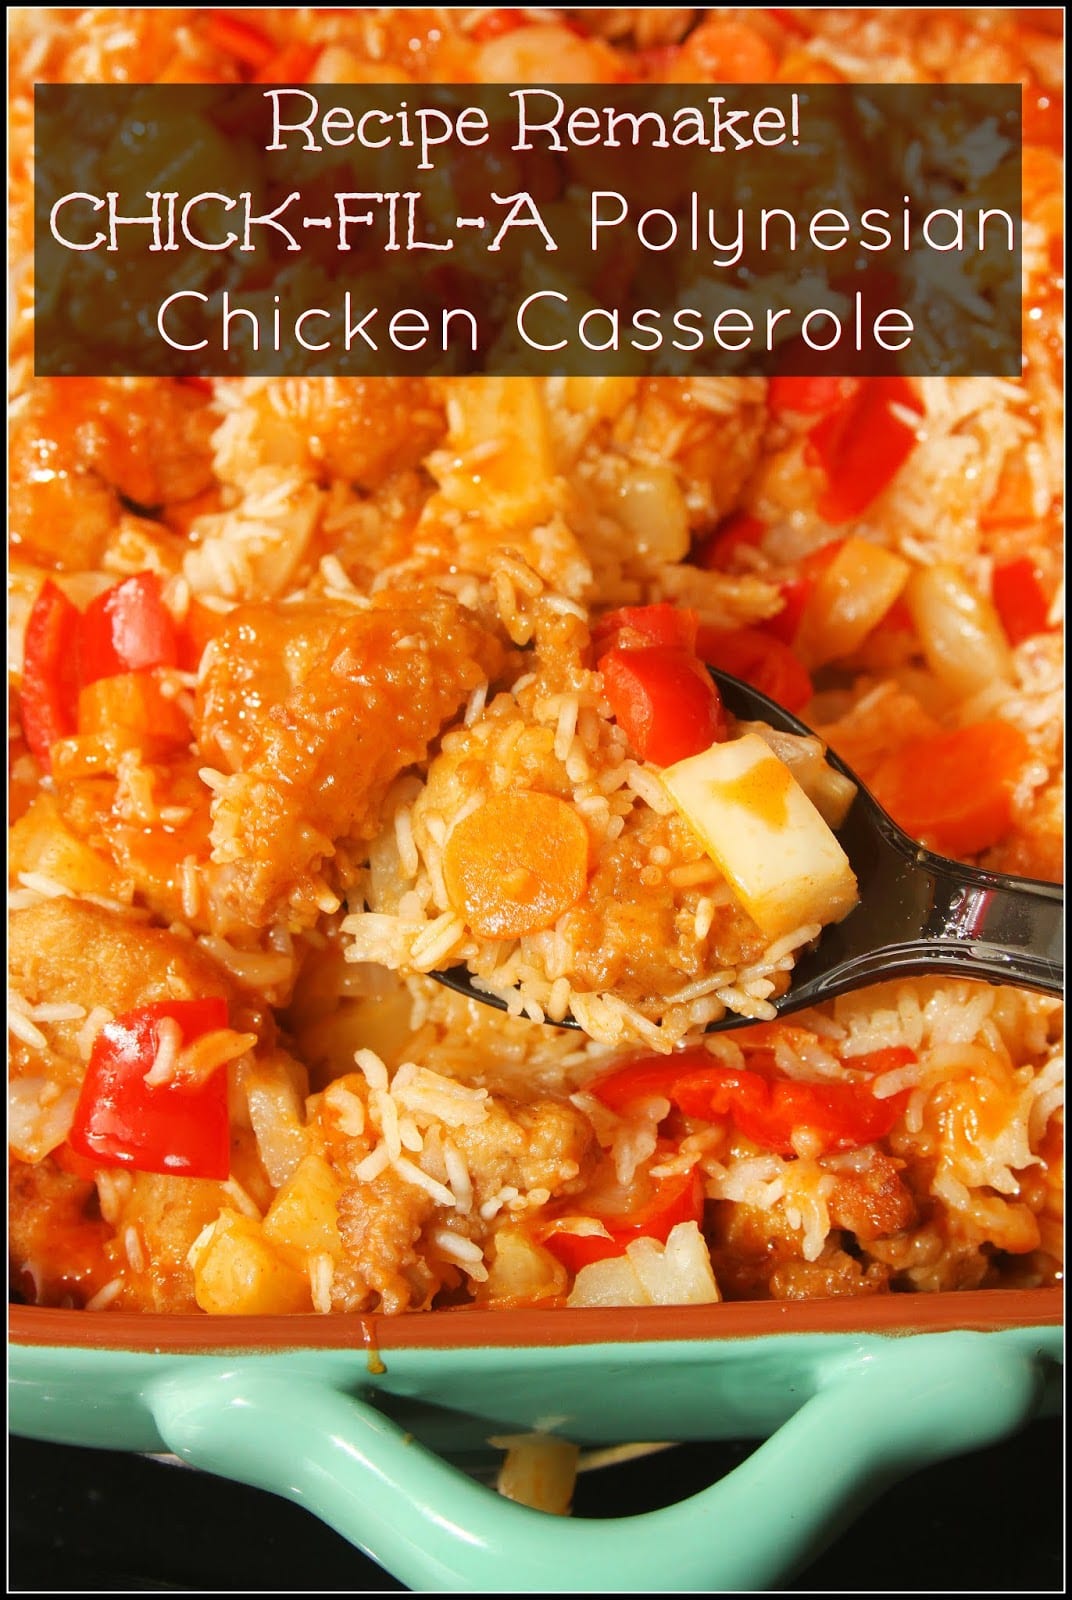 Chick-fil-A Polynesian Chicken Casserole - For the Love of Food